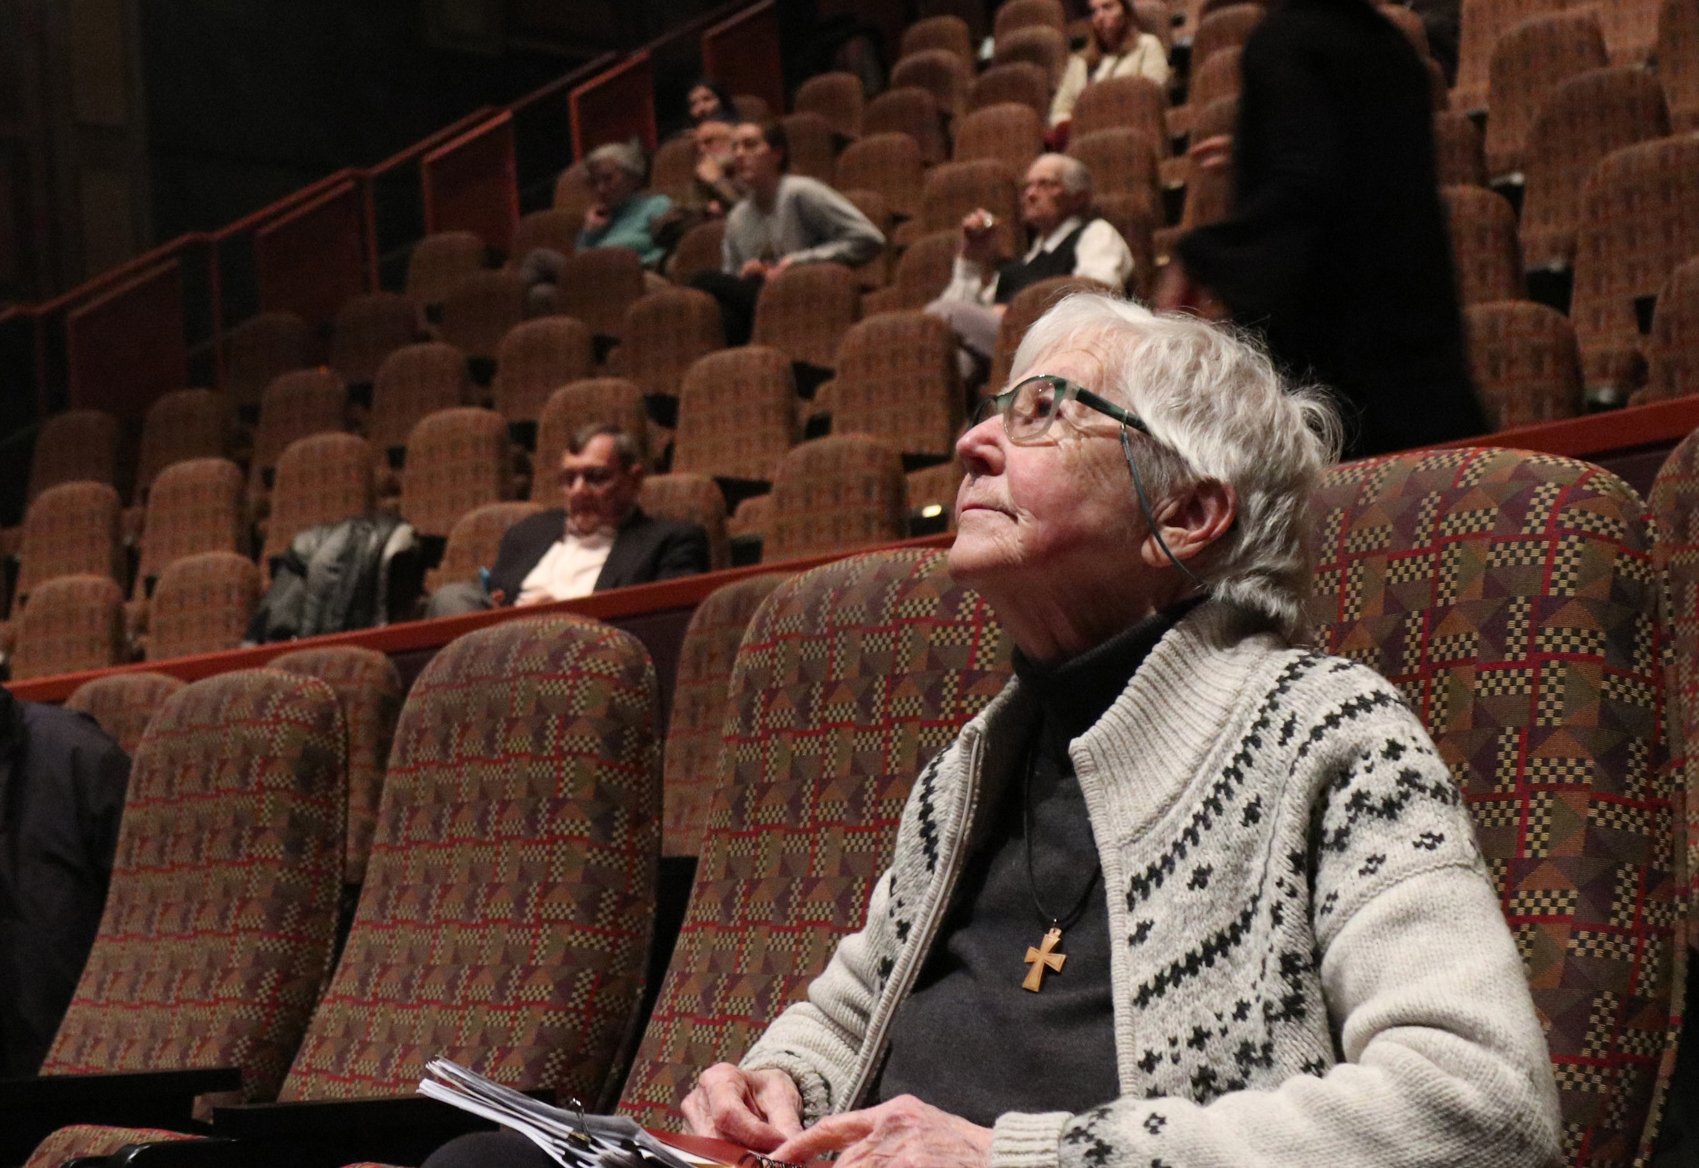 Sister Megan Rice, a member of the Society of the Holy Child Jesus, looks up at the movie screen in the DeBartolo Performing Arts Center April 8, 2018, at the University of Notre Dame in South Bend, Ind., awaiting the screening of a documentary about her 